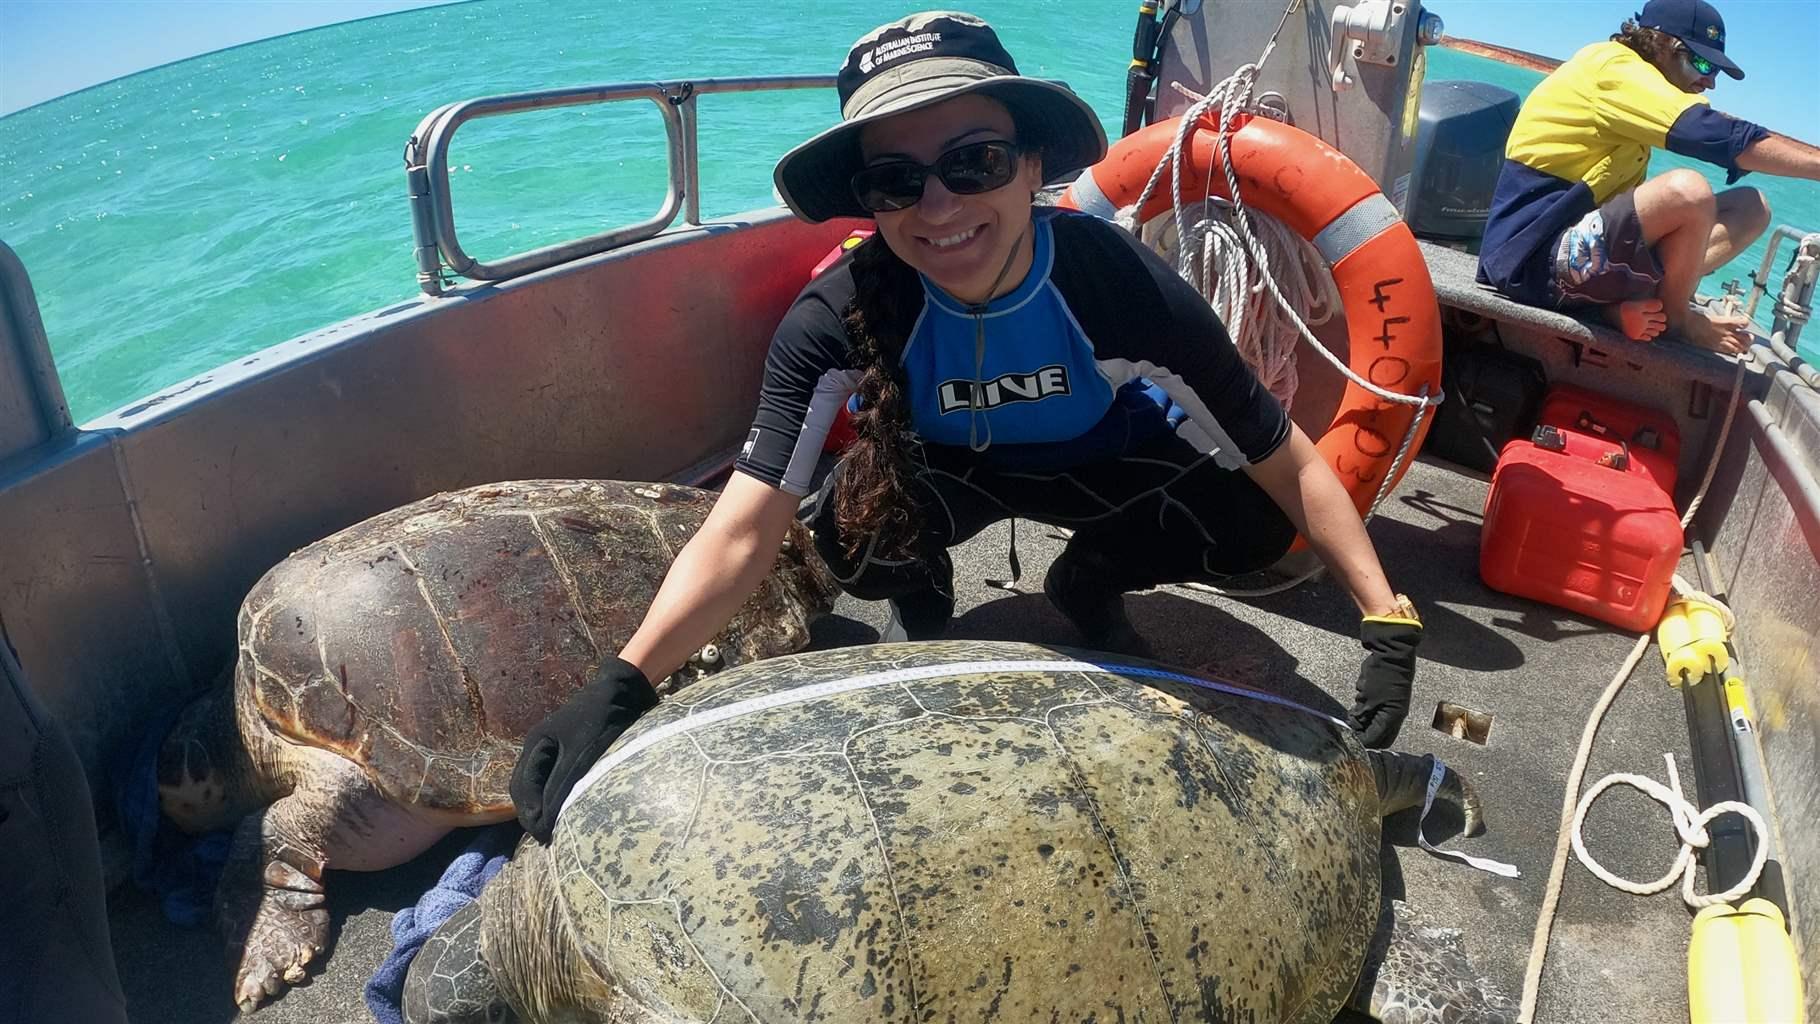 Sequeira measures a green turtle during her lab’s field trip to Shark Bay, Western Australia.